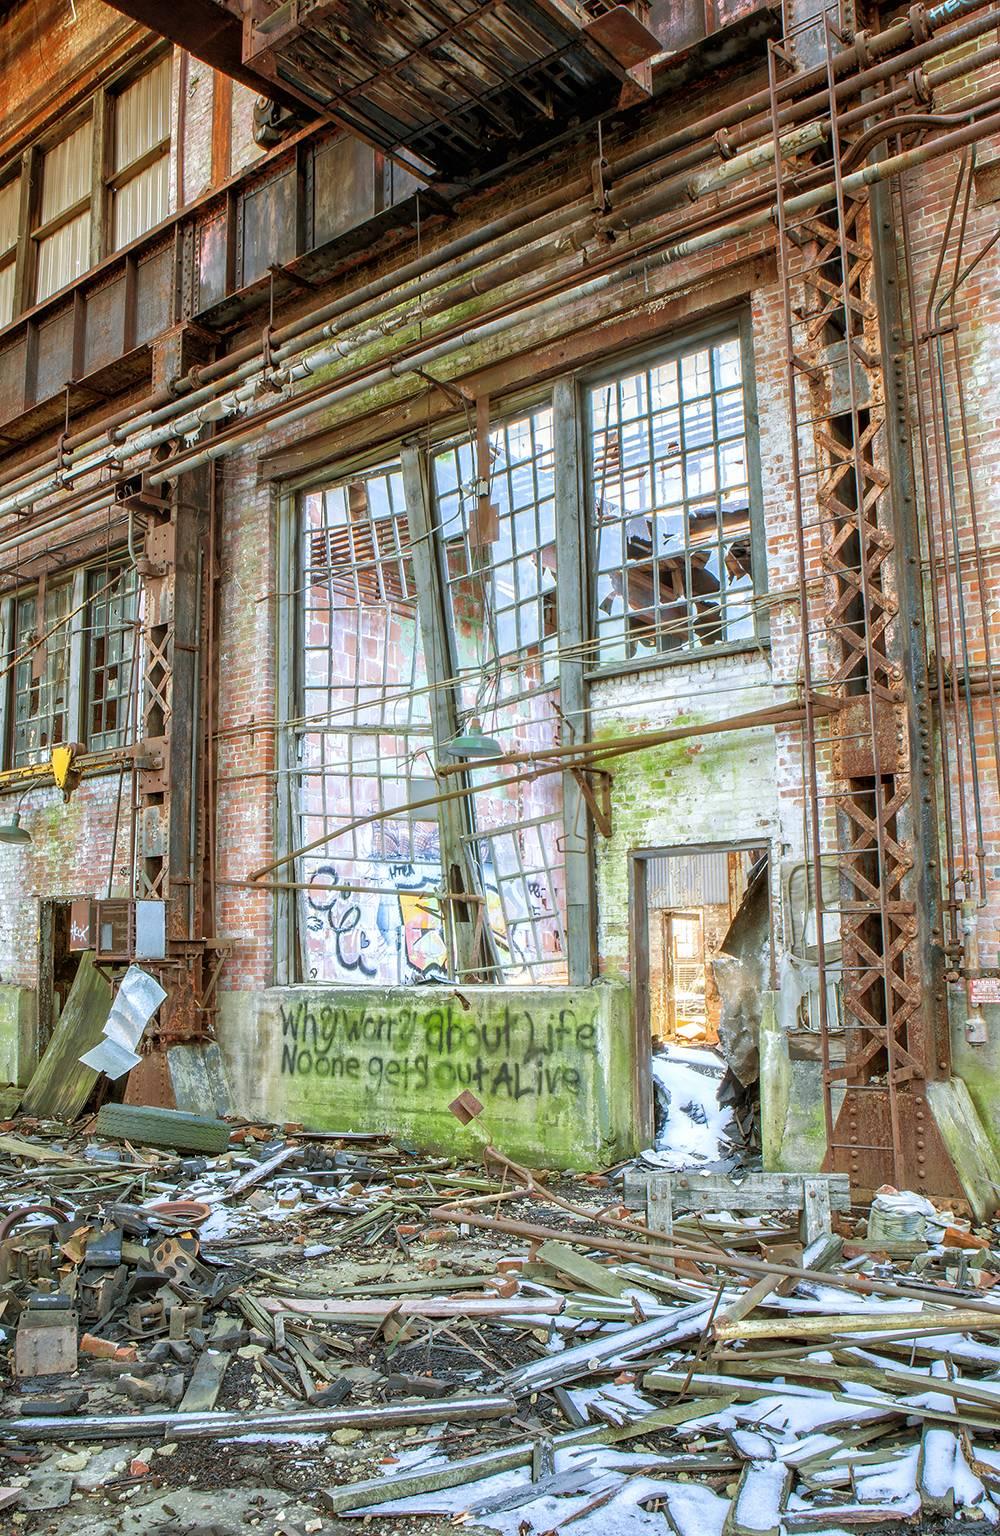 "Endure", abandoned, industrial, metal print, blue, green, color photograph - Photograph by Rebecca Skinner